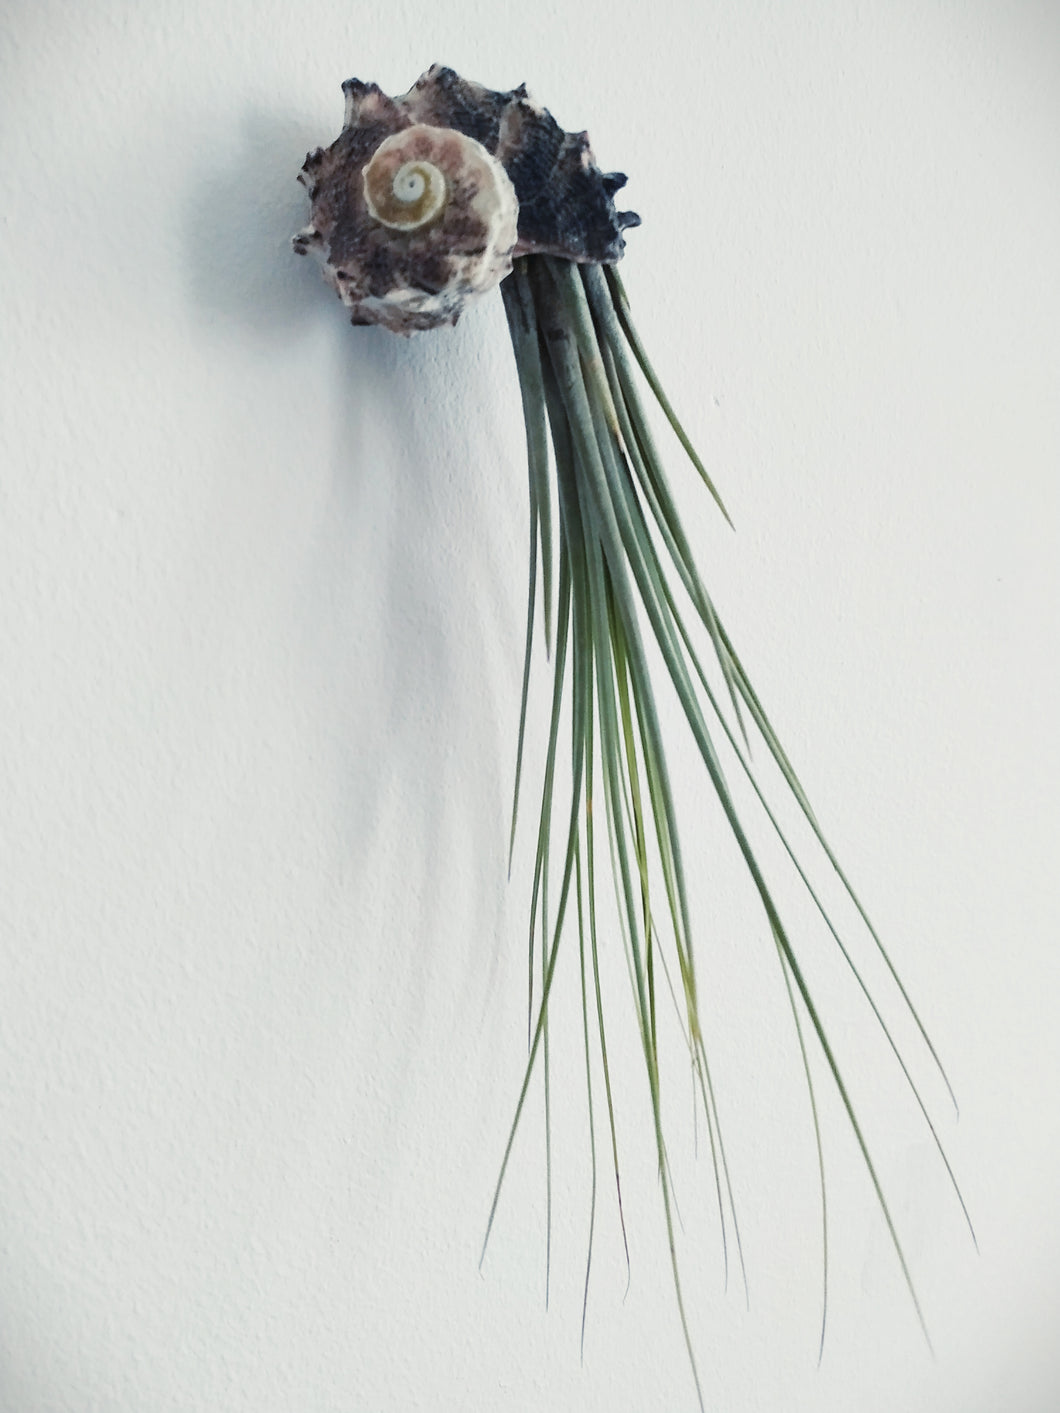 Air plant jellyfish, Juncea with purple spiral shell